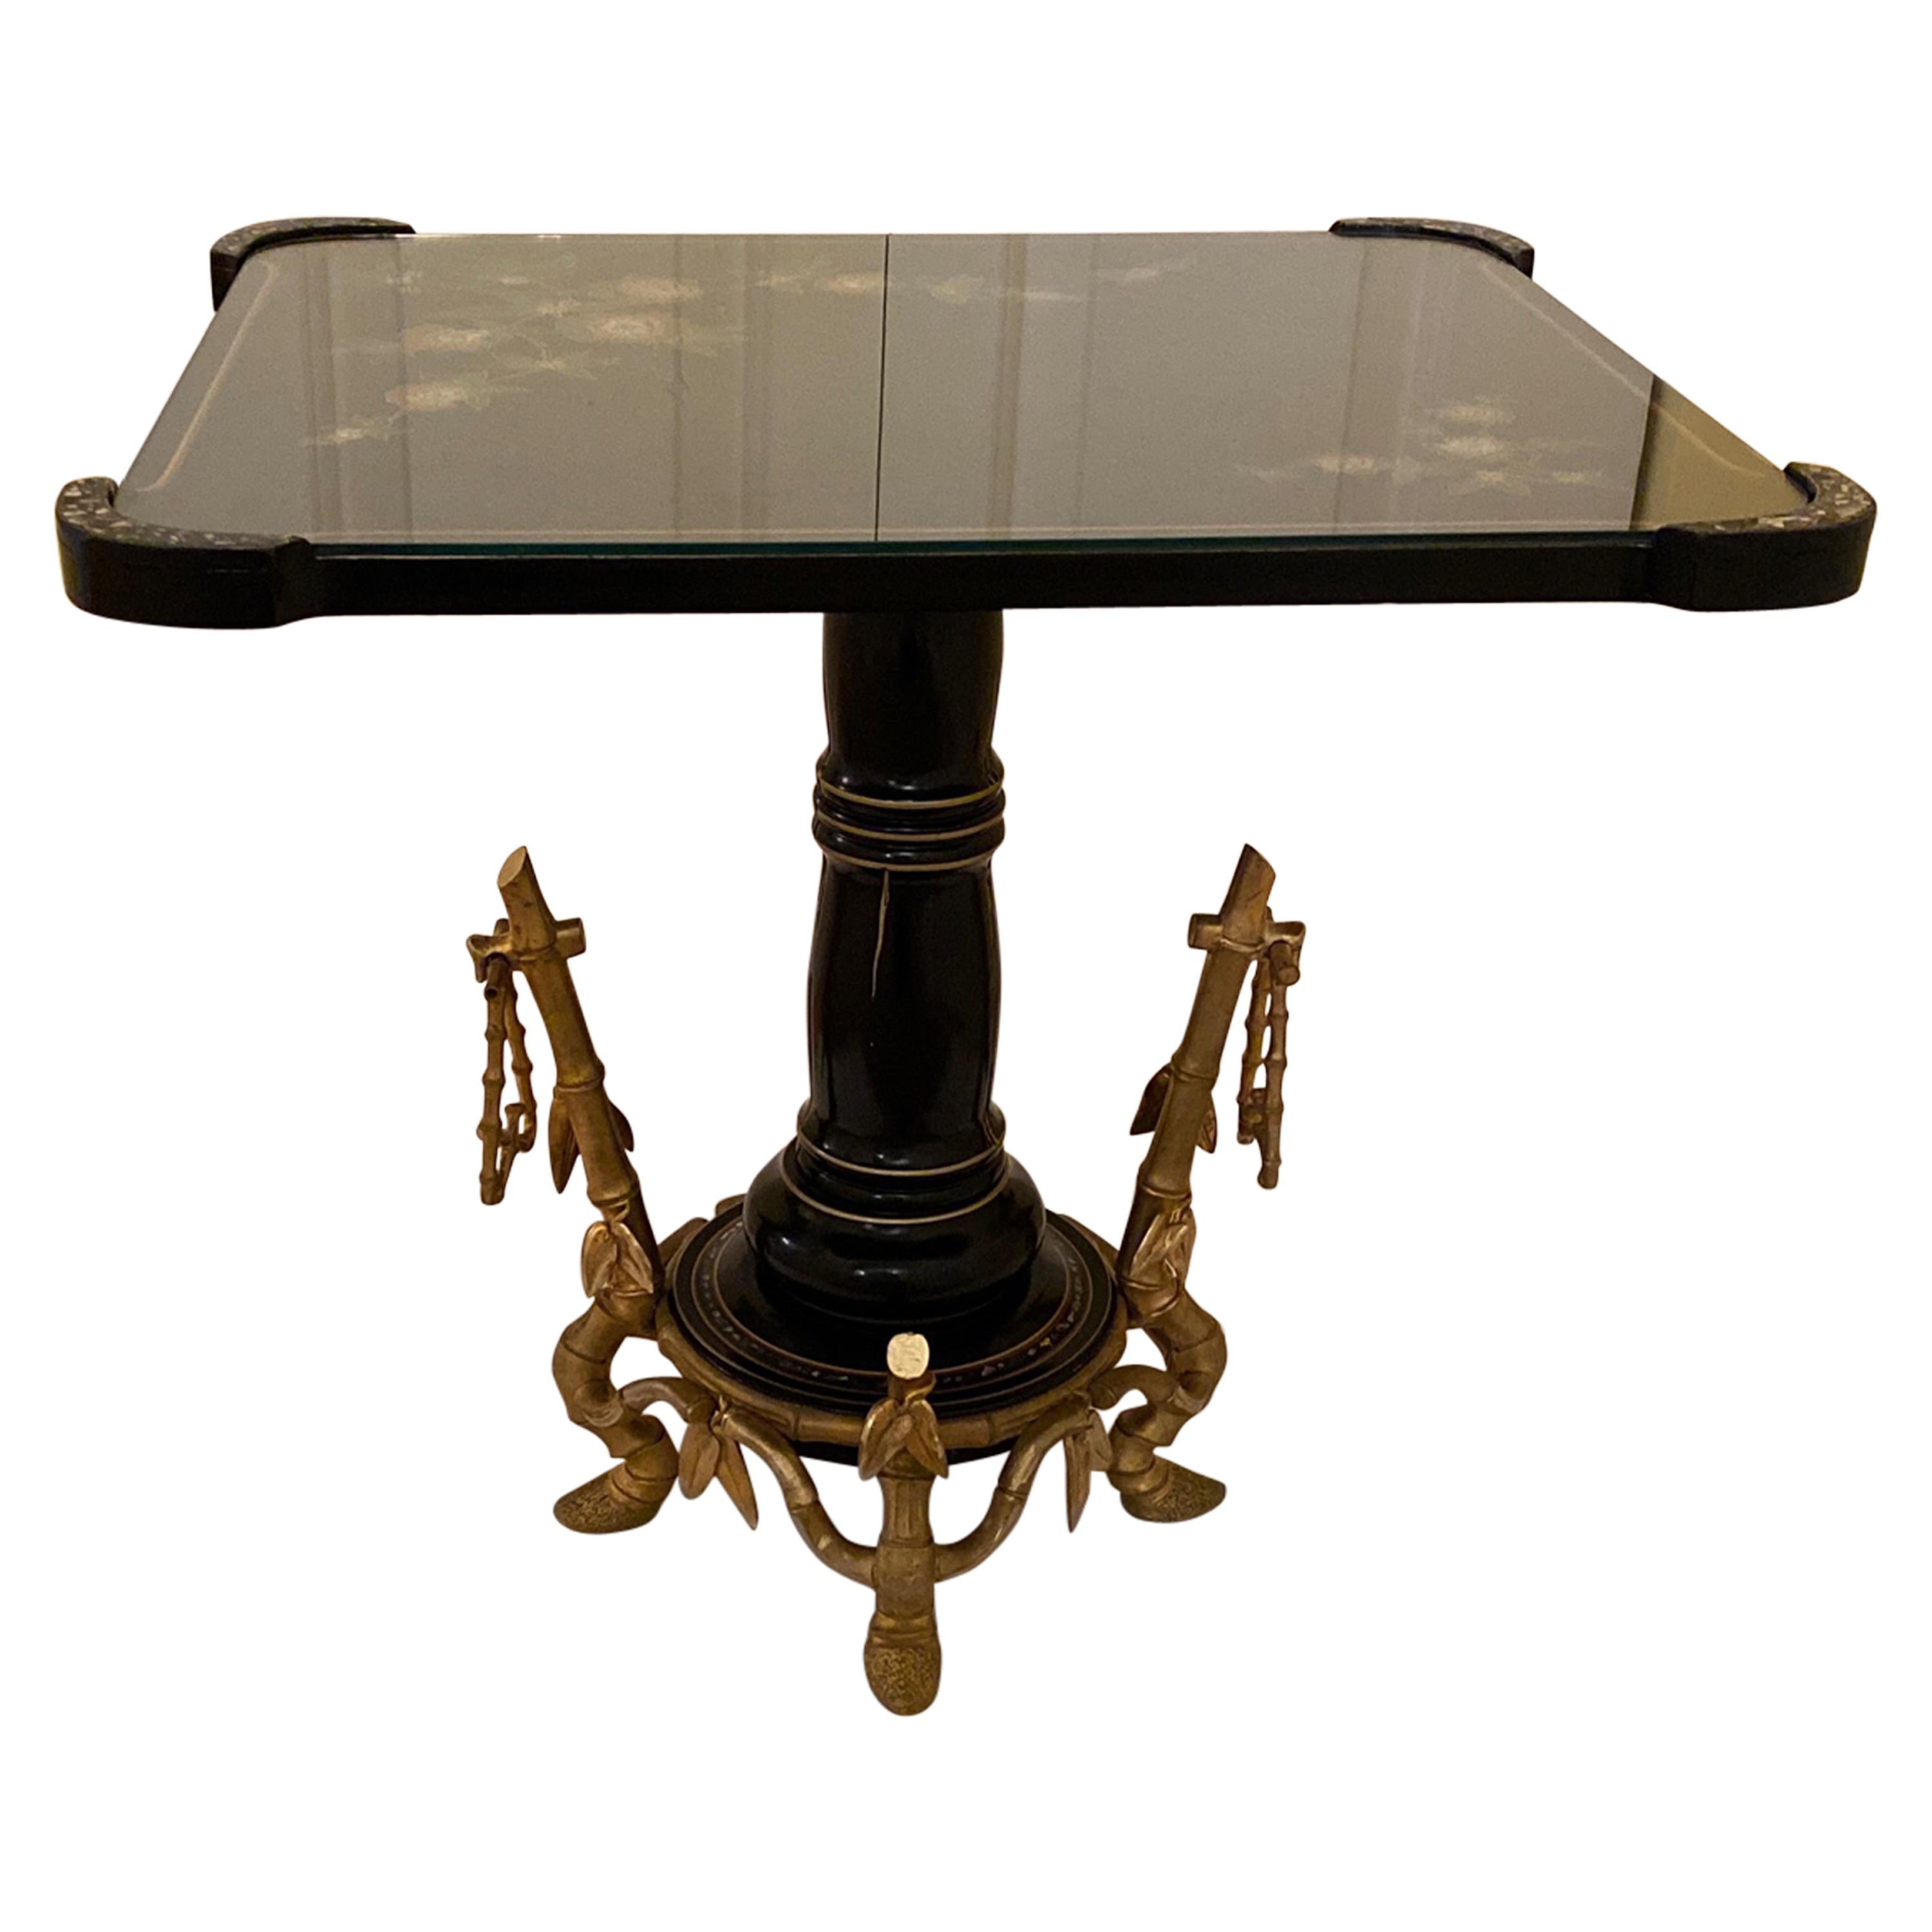 French Low Table with Aesthetic Movement Ormolu Base by Maison Giroux 1870's For Sale